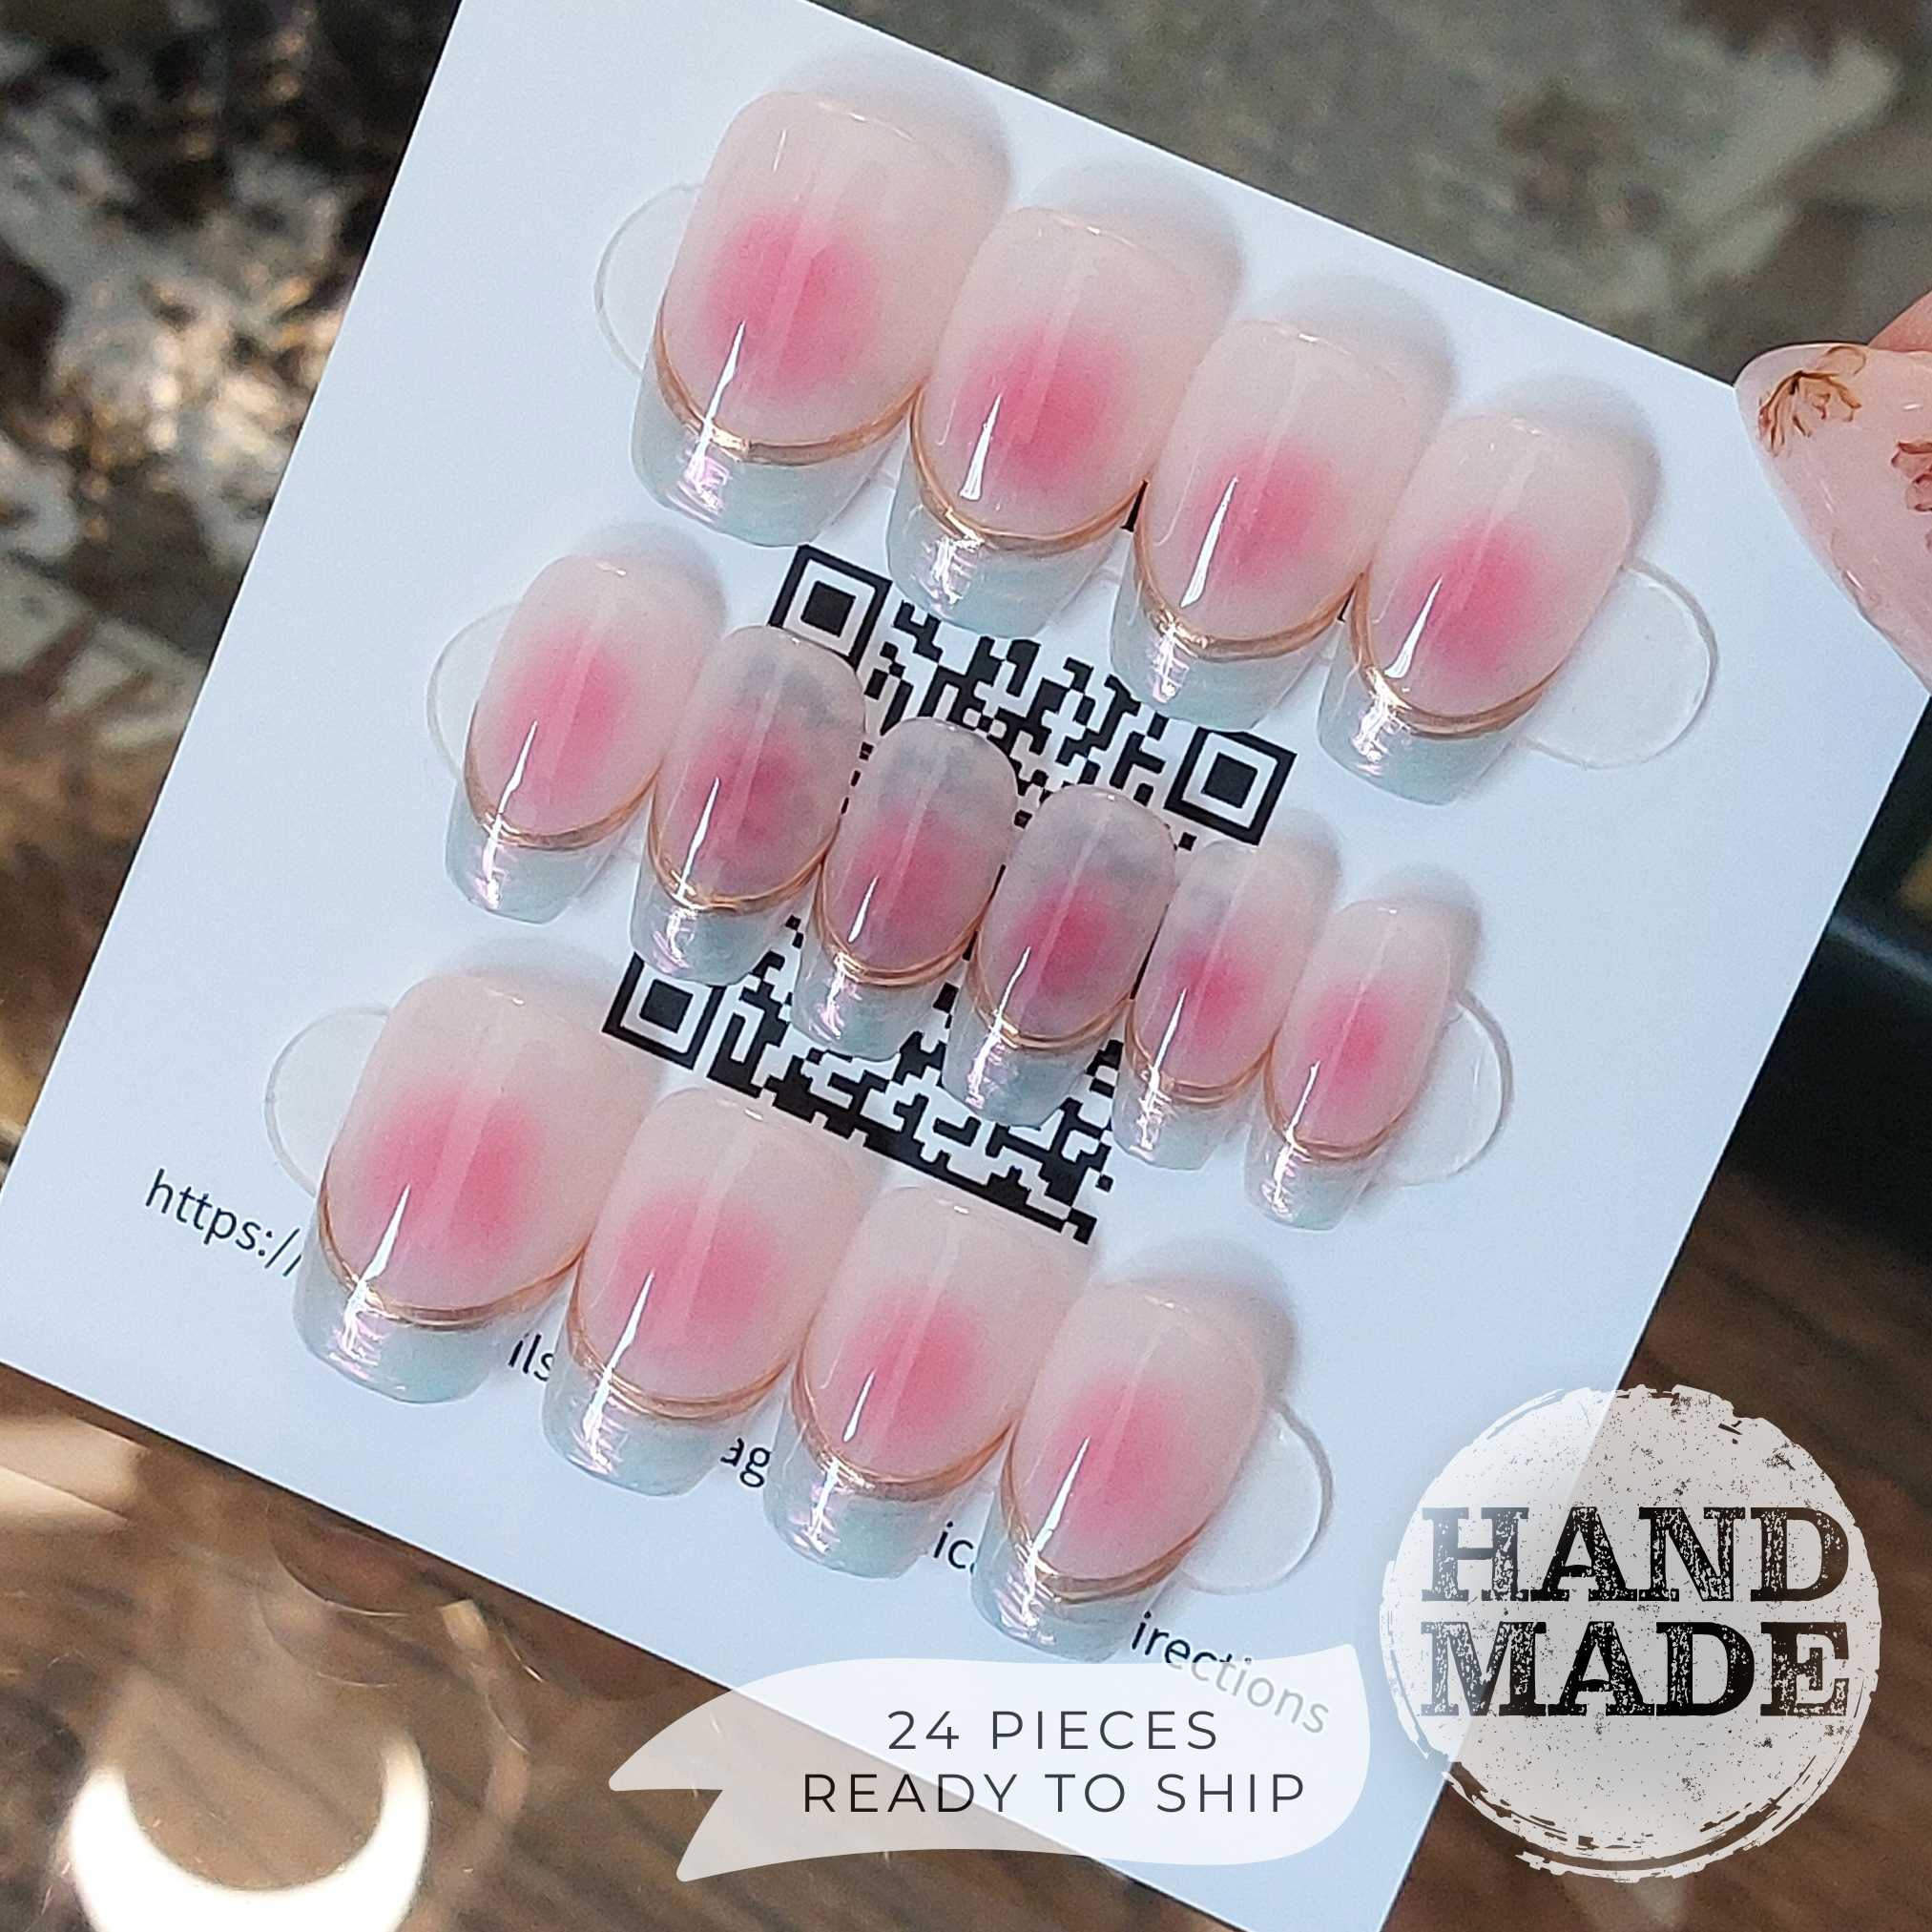 Blush jelly nails, blush press on nails with pink center and nude base gel, gold chrome french lines and pearl french tips, reusable nails. FancyB press on nails shown in short coffin.